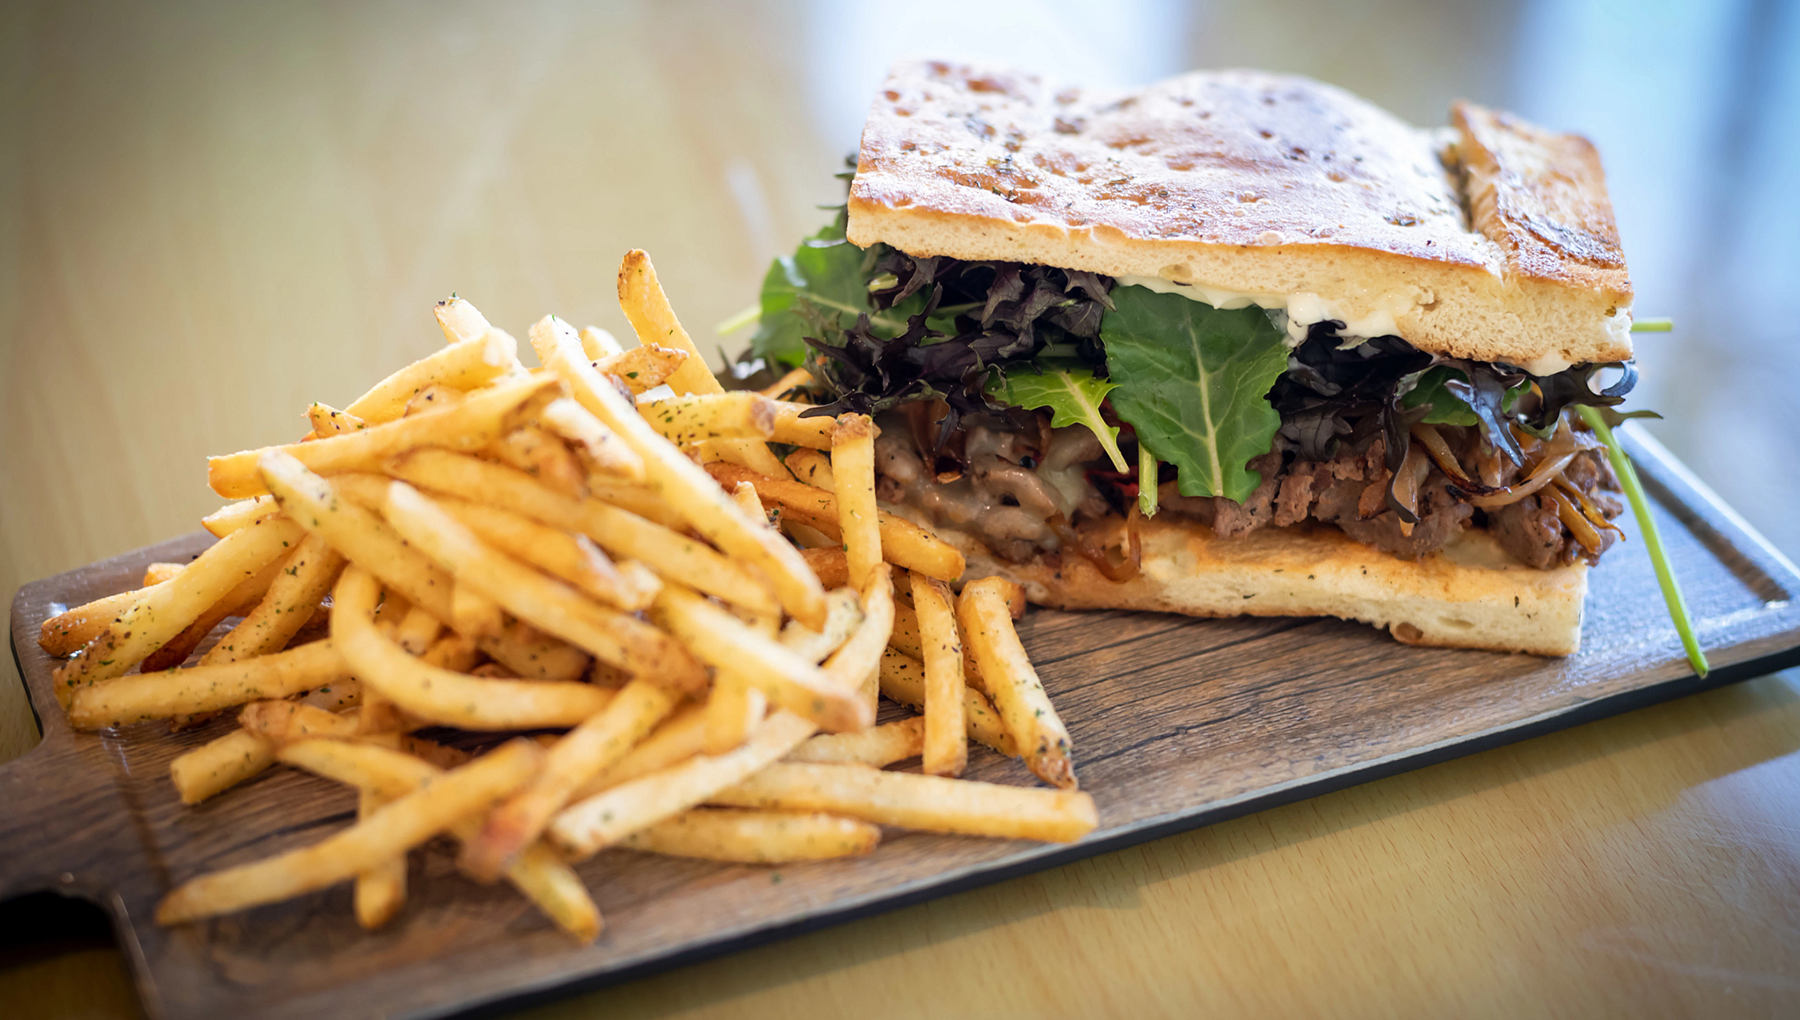 A feature of Last Chair Restaurant's menu is a steak sandwich with french fries. 